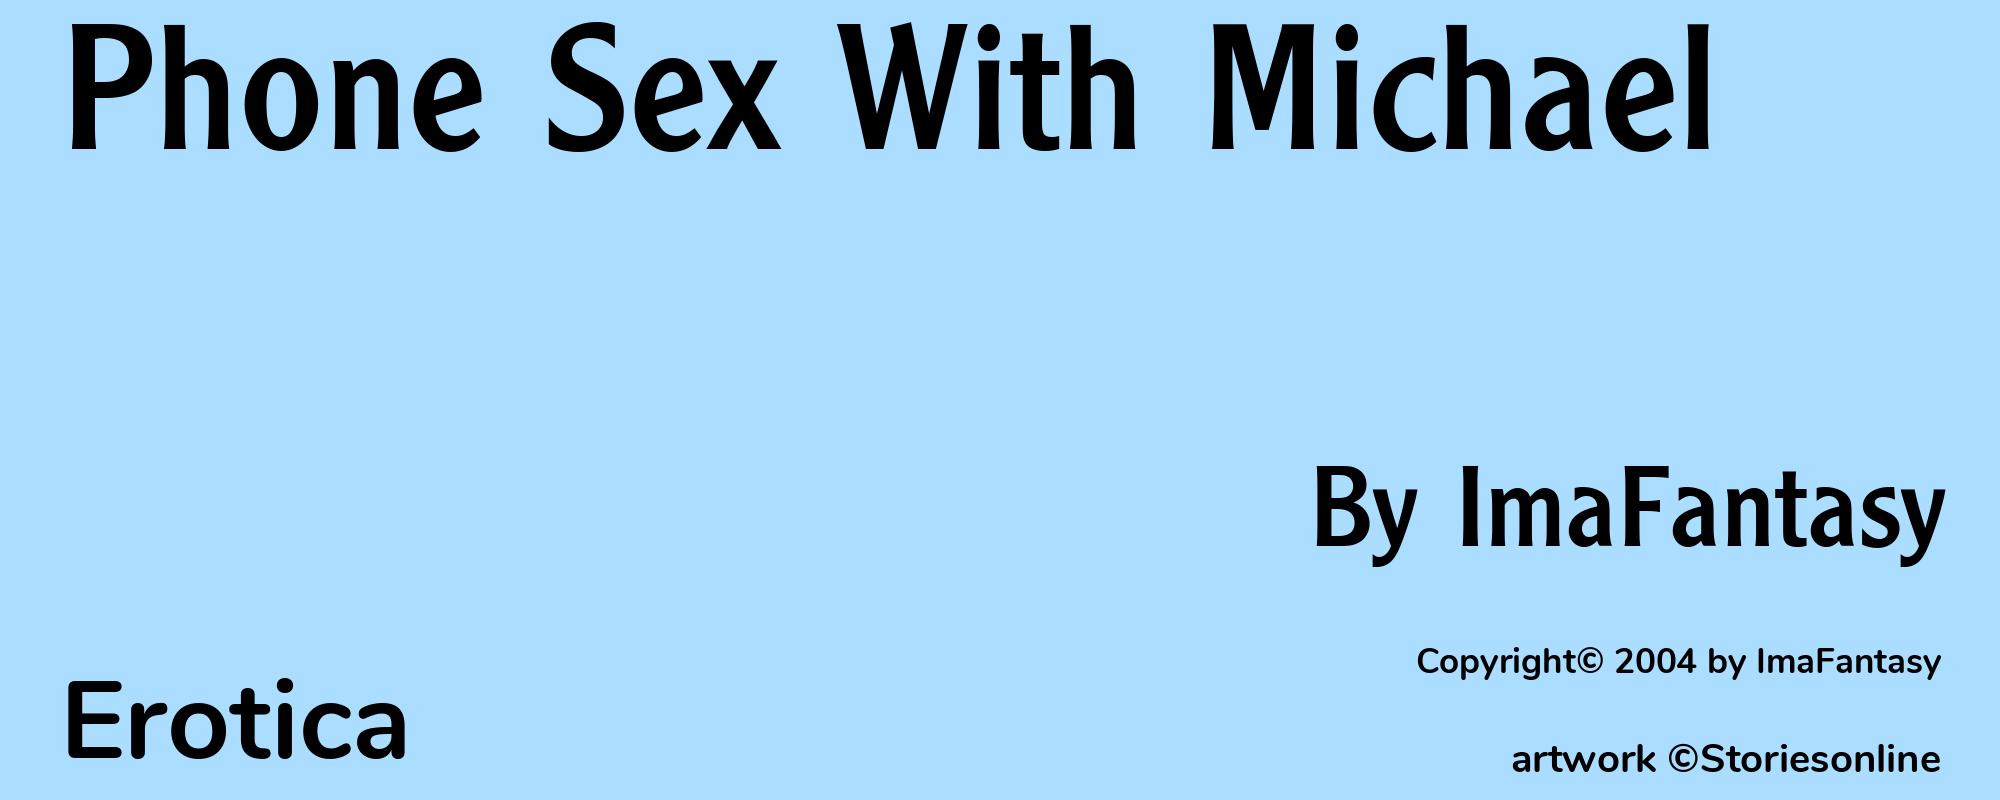 Phone Sex With Michael - Cover